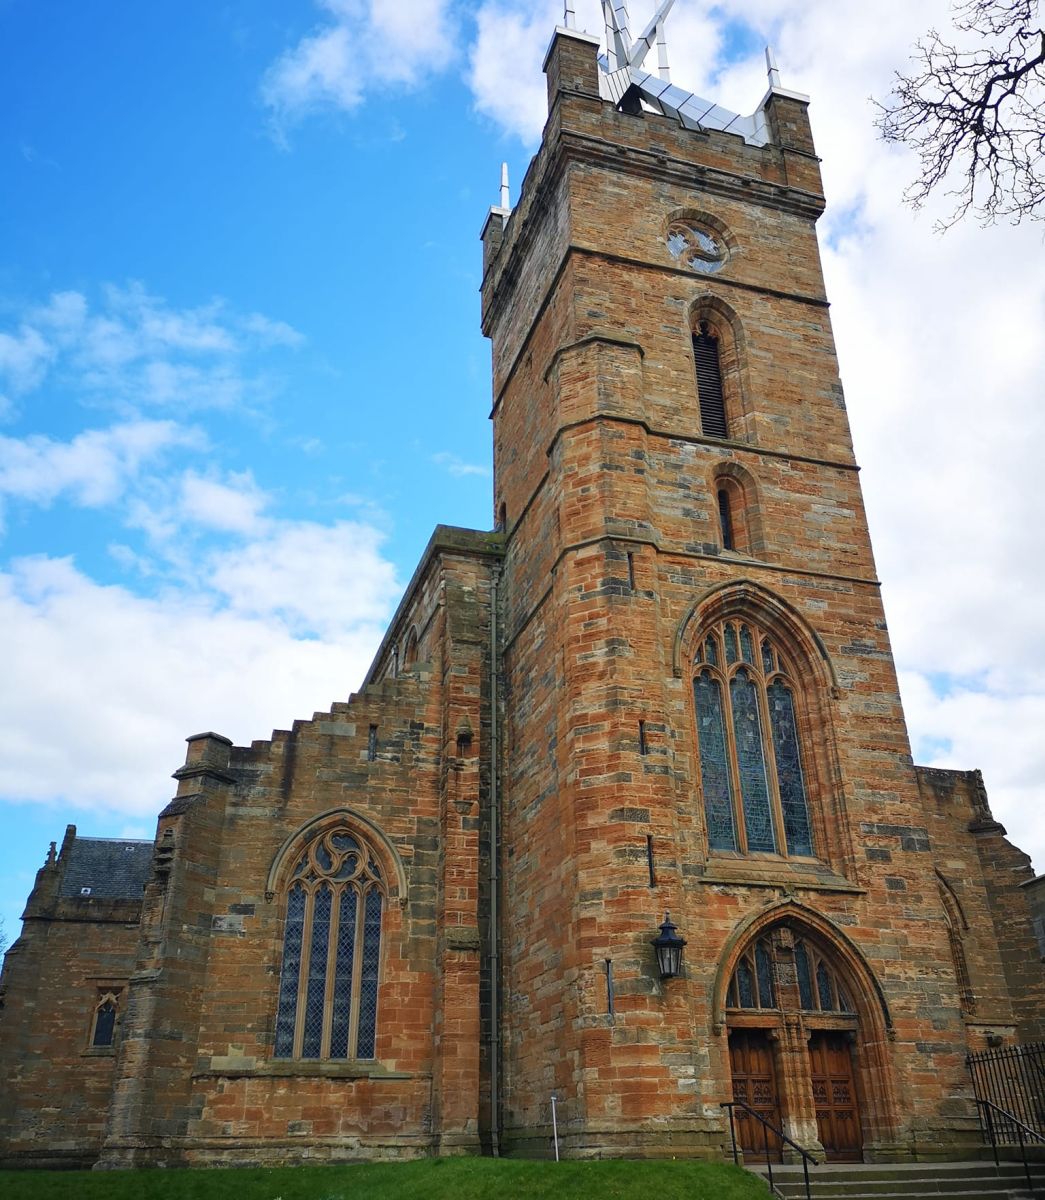 St Michael's Church at Linlithgow Palace